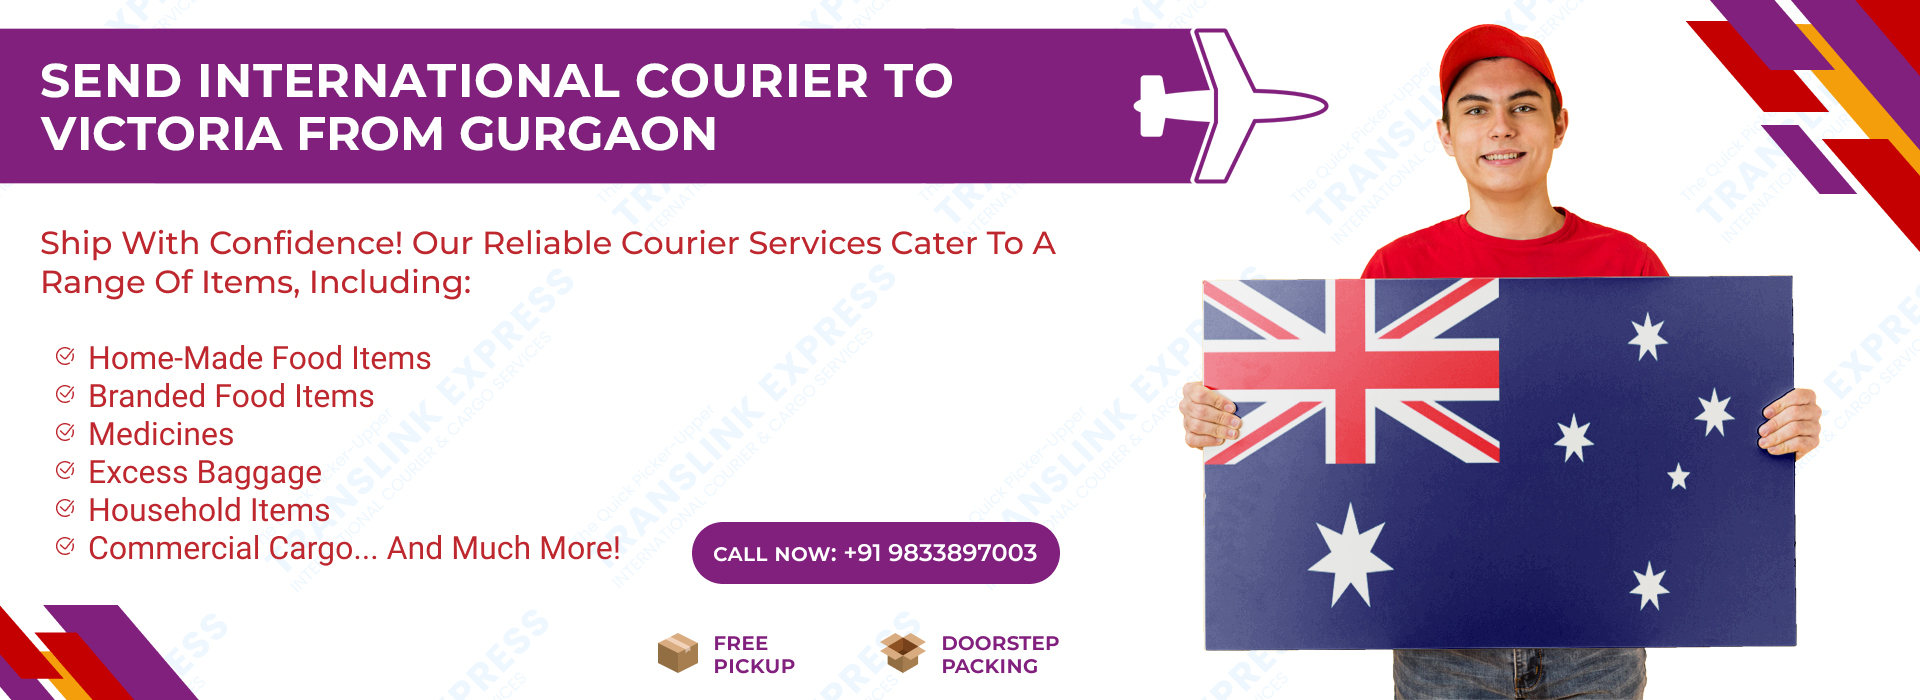 Courier to Victoria From Gurgaon